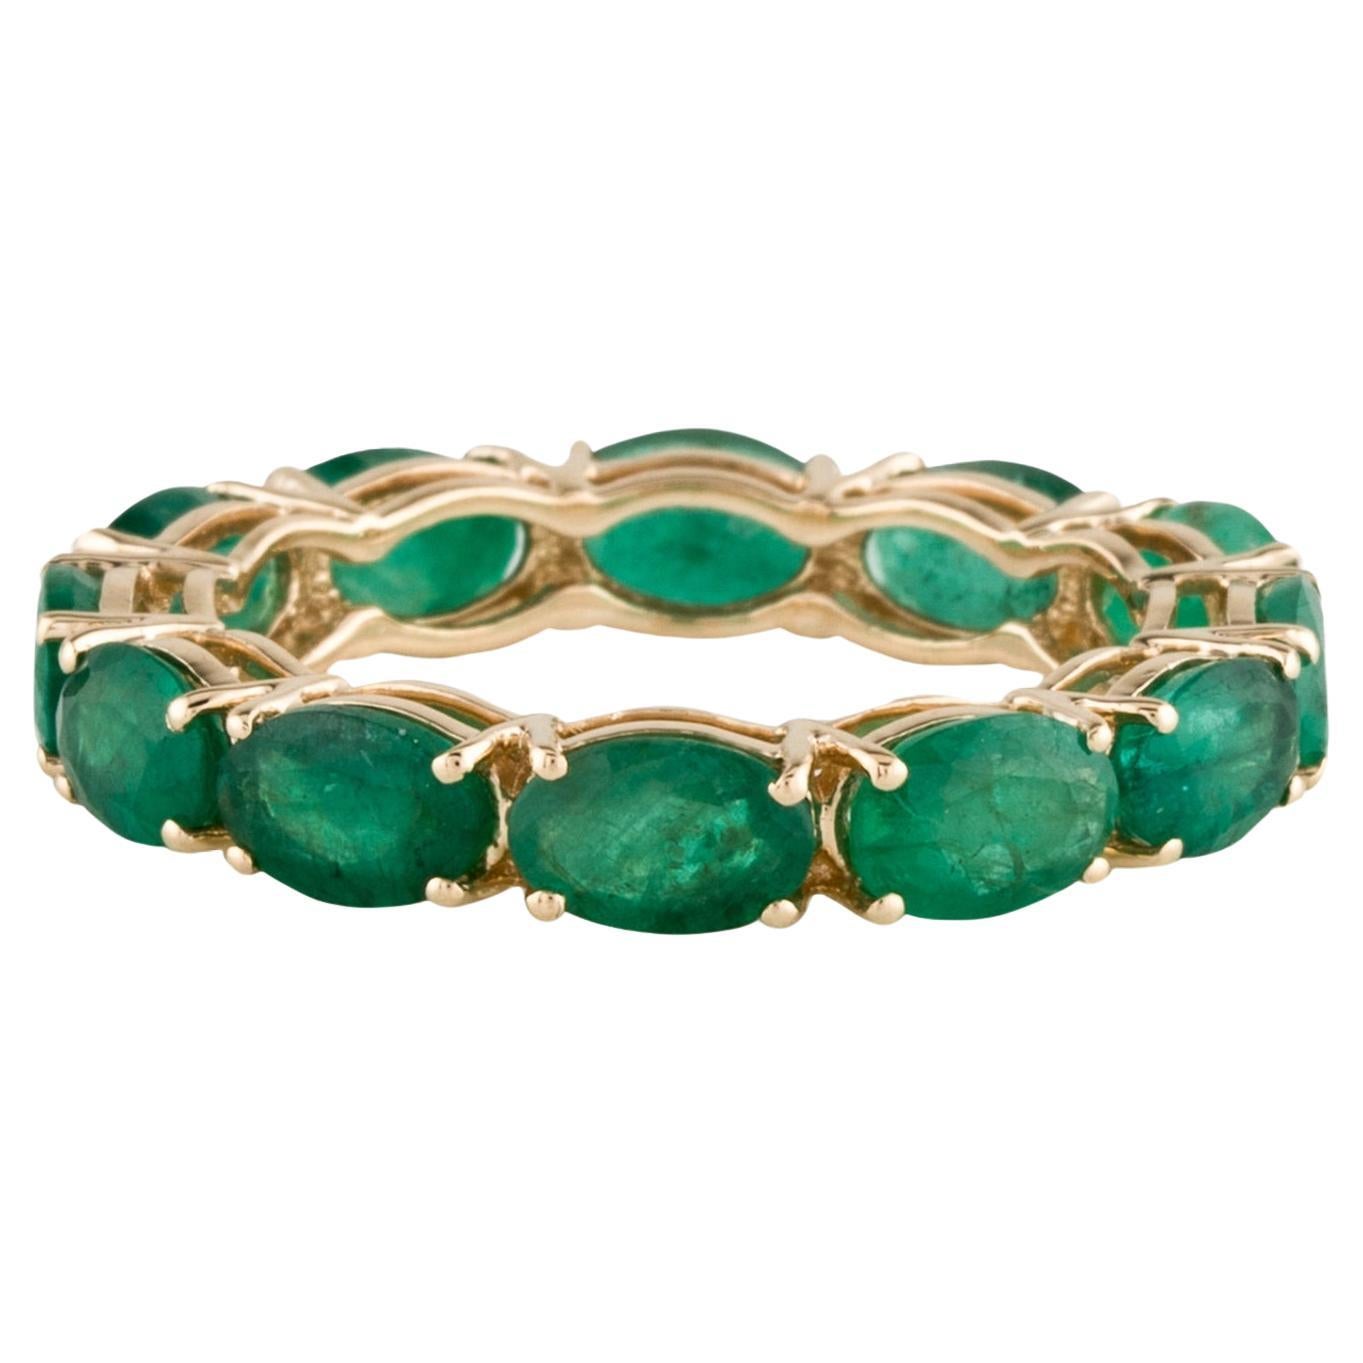 Exquisite 14K Gold 3.52ctw Emerald Eternity Band Ring - Size 8 - Luxury Jewelry For Sale